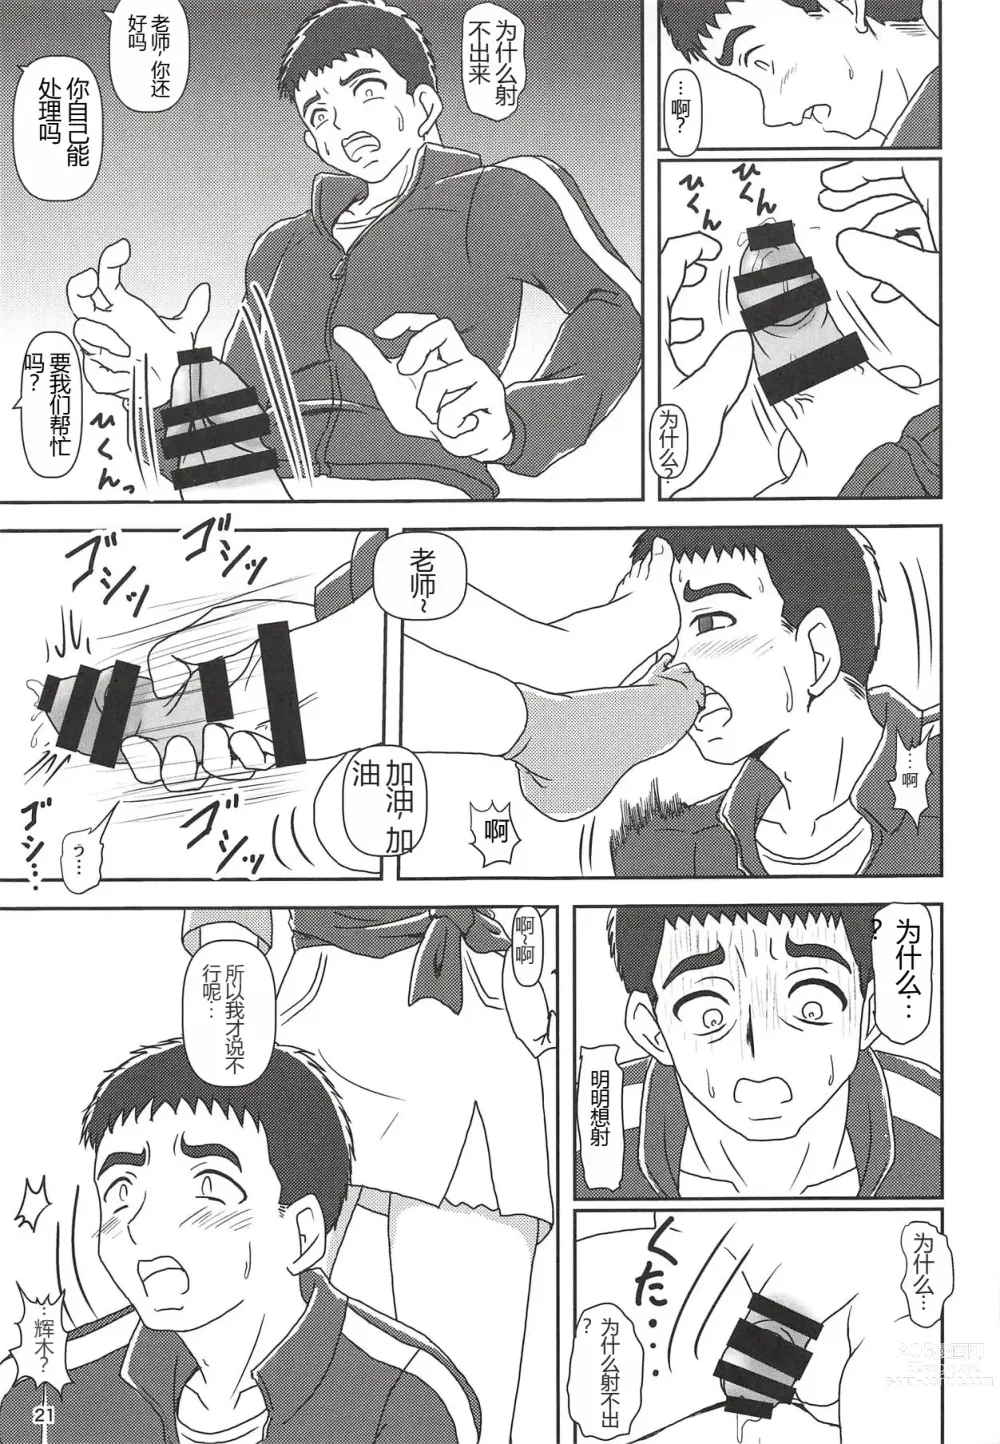 Page 20 of doujinshi Hugtto! Zuricure